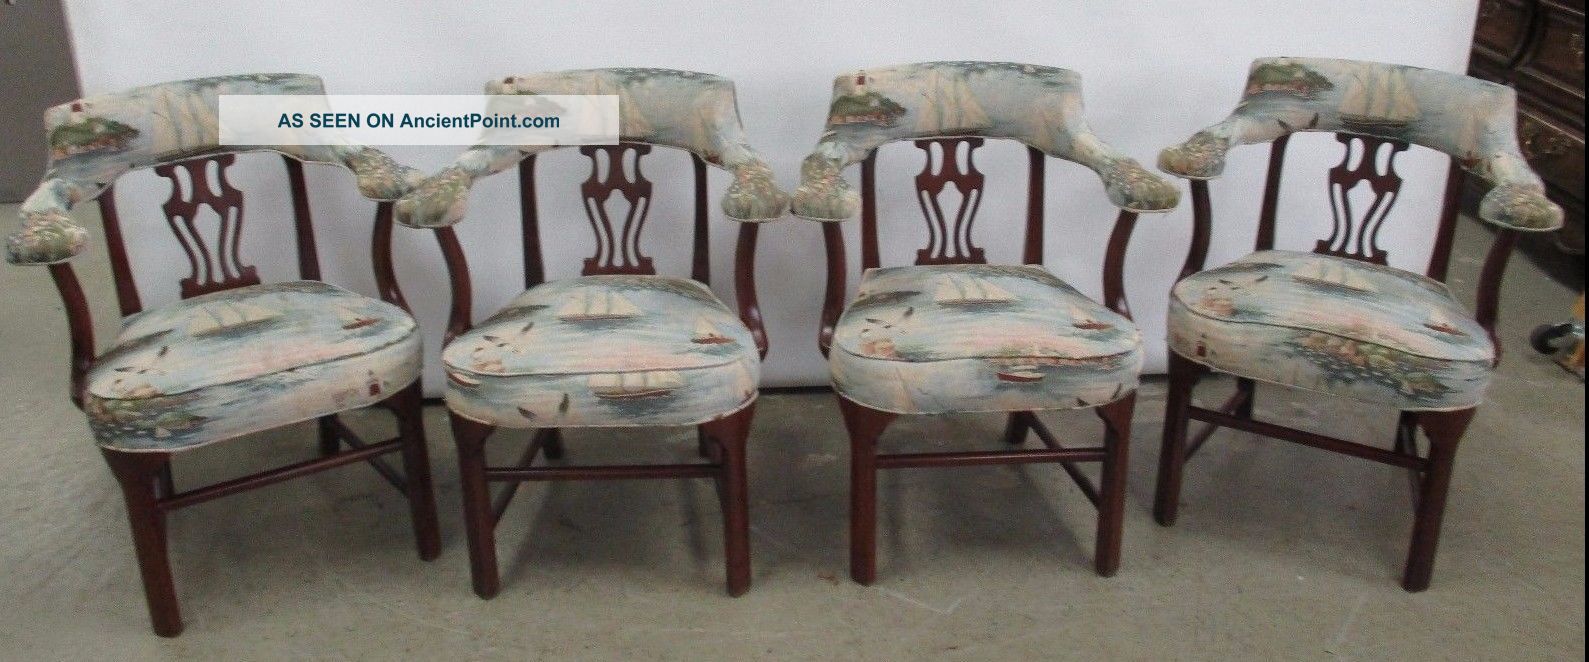 4 Antique Chair Frames With Vintage Nautical Fabric Seats Mahogany Frame Chairs 1900-1950 photo